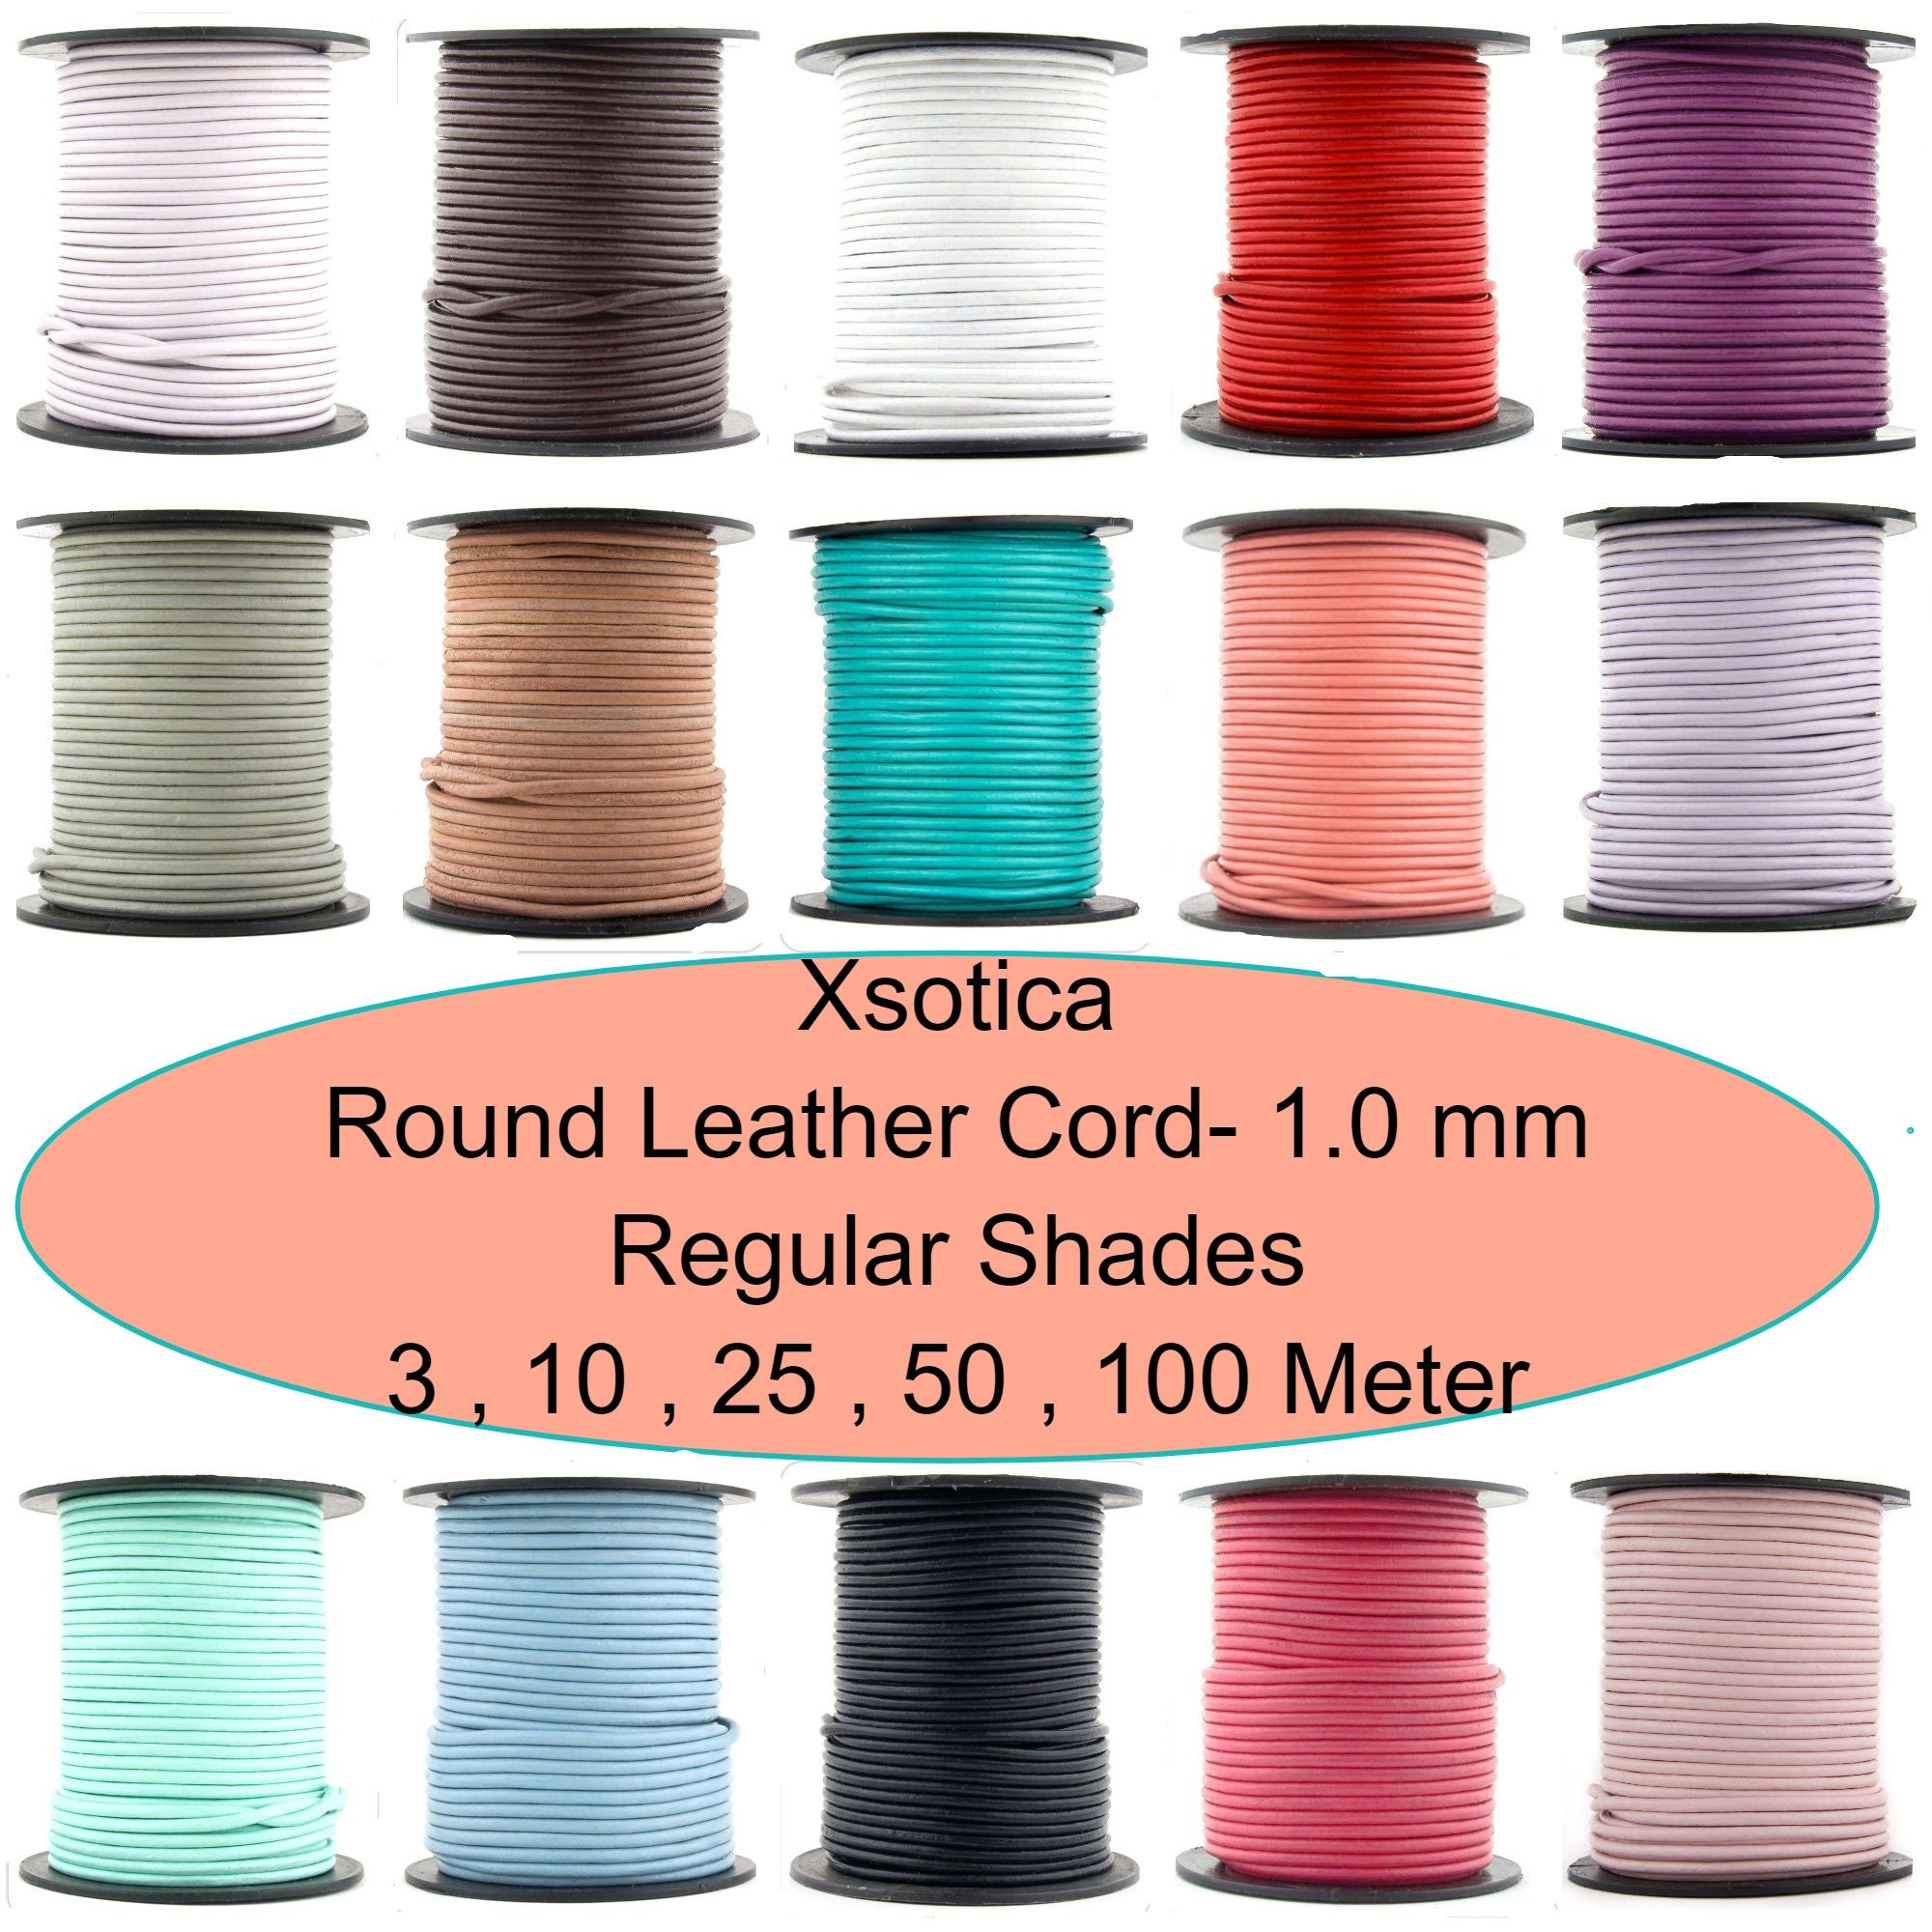 Round Leather Lace - 25 Yard Spool - The Wandering Bull